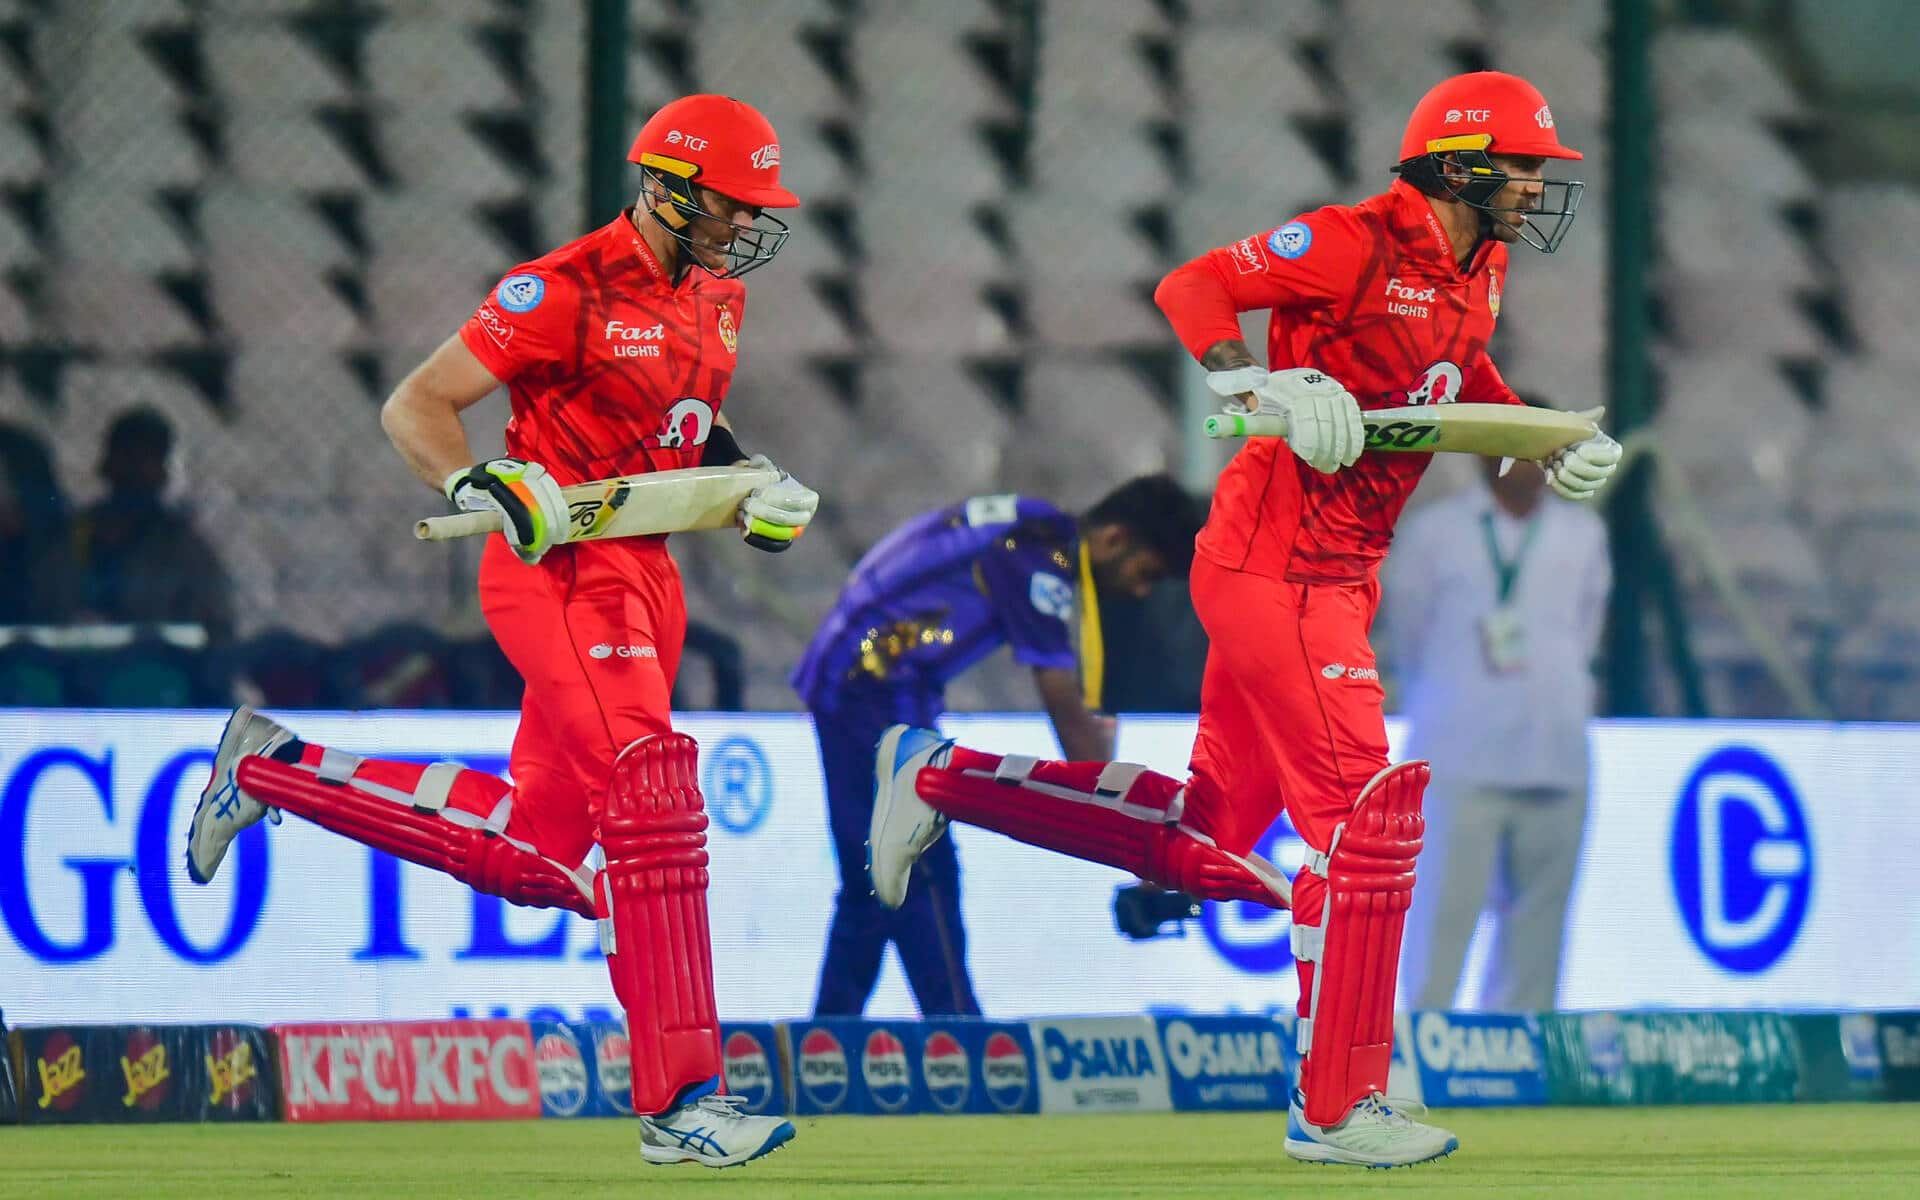 Guptill and Hales come out to bat in Eliminator 2 (Source: PSL/PCB)